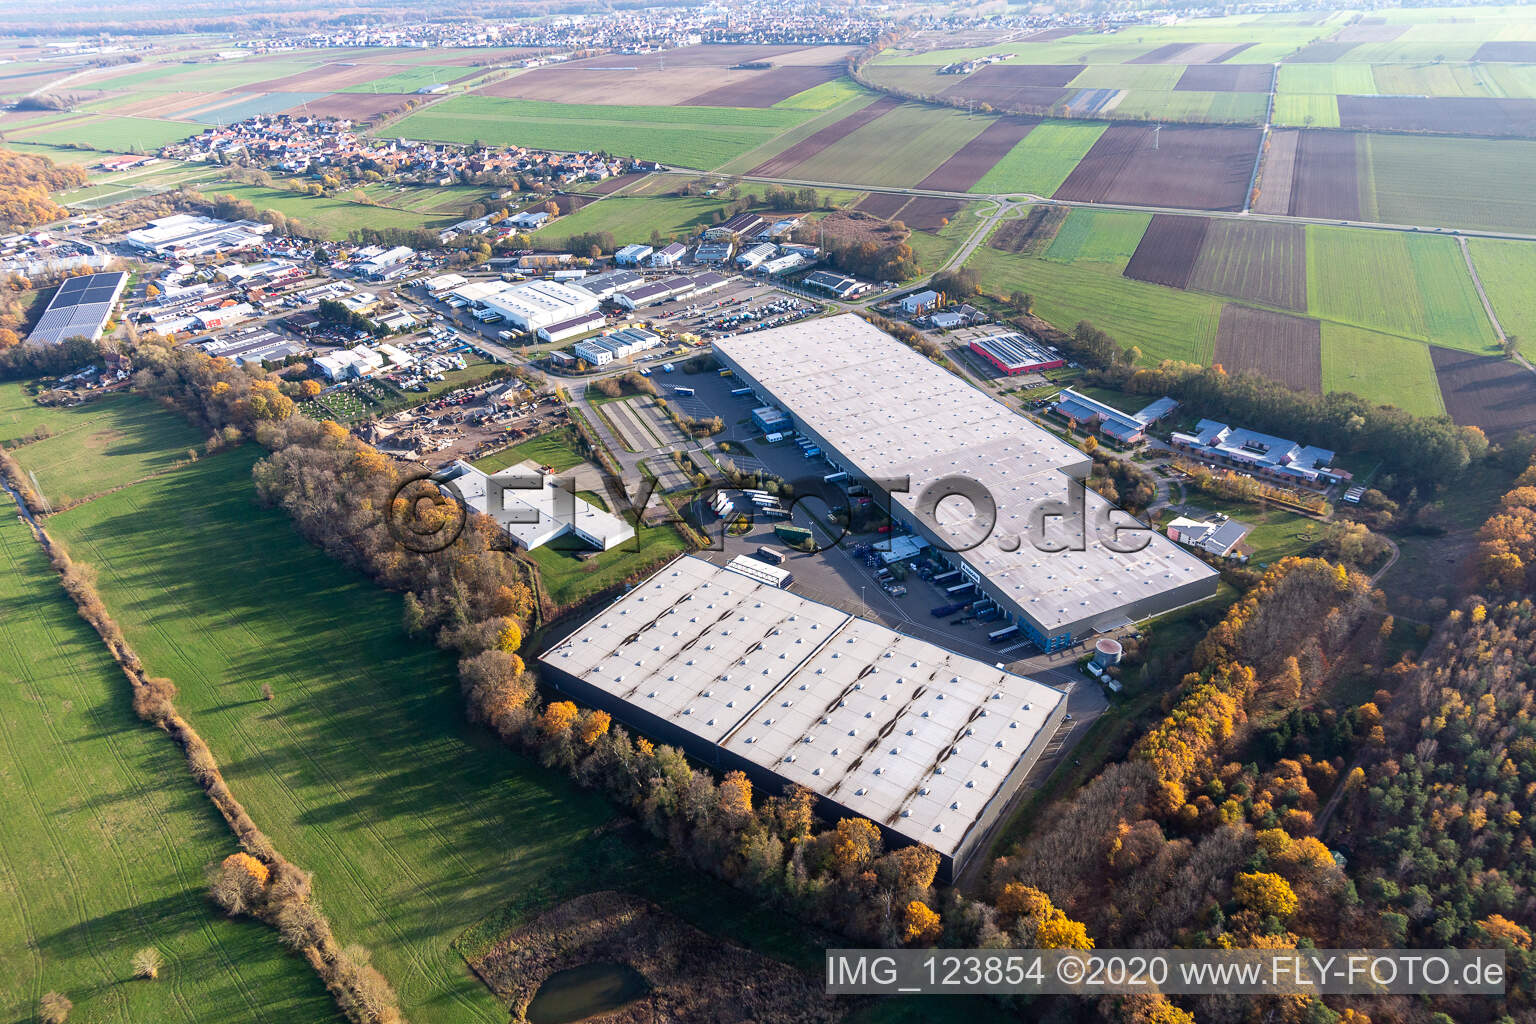 Horst commercial area with Magna Exteriors, Random Logistics, STS Group and Thermo Fisher in the district Minderslachen in Kandel in the state Rhineland-Palatinate, Germany seen from a drone